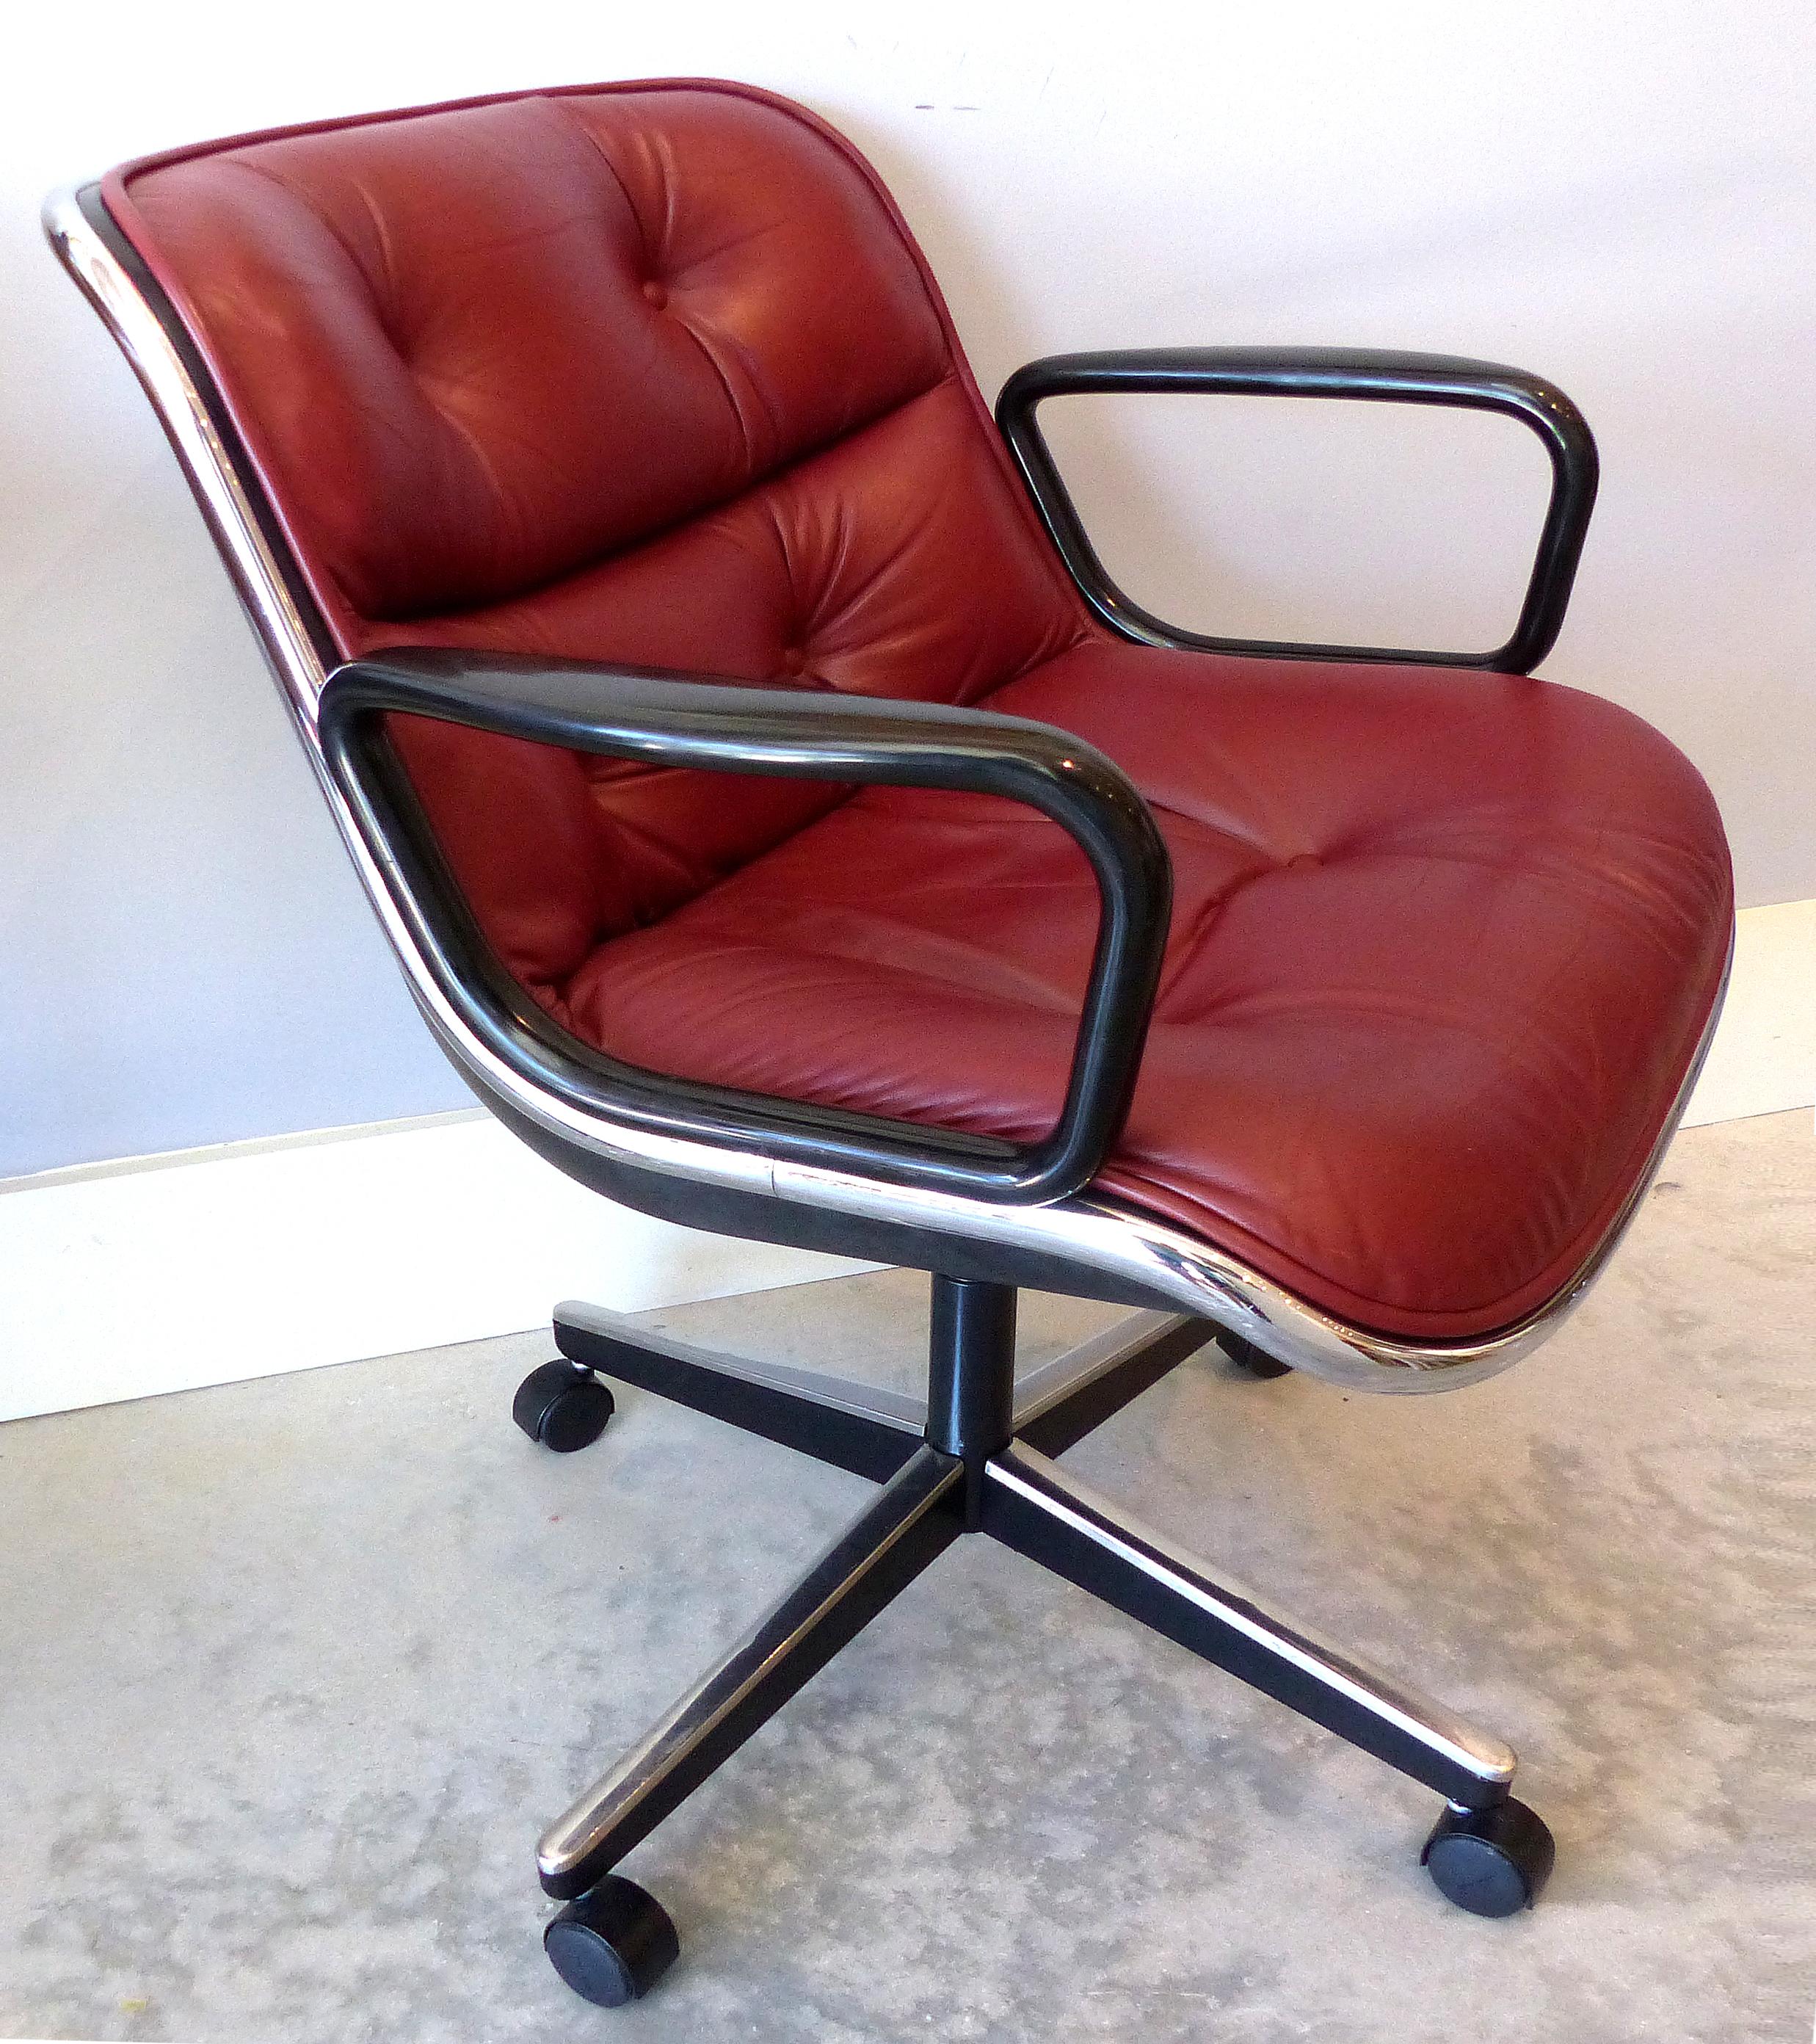 Lacquered Charles Pollack Modern Executive Swivel Chairs for Knoll, 3 Pairs Available